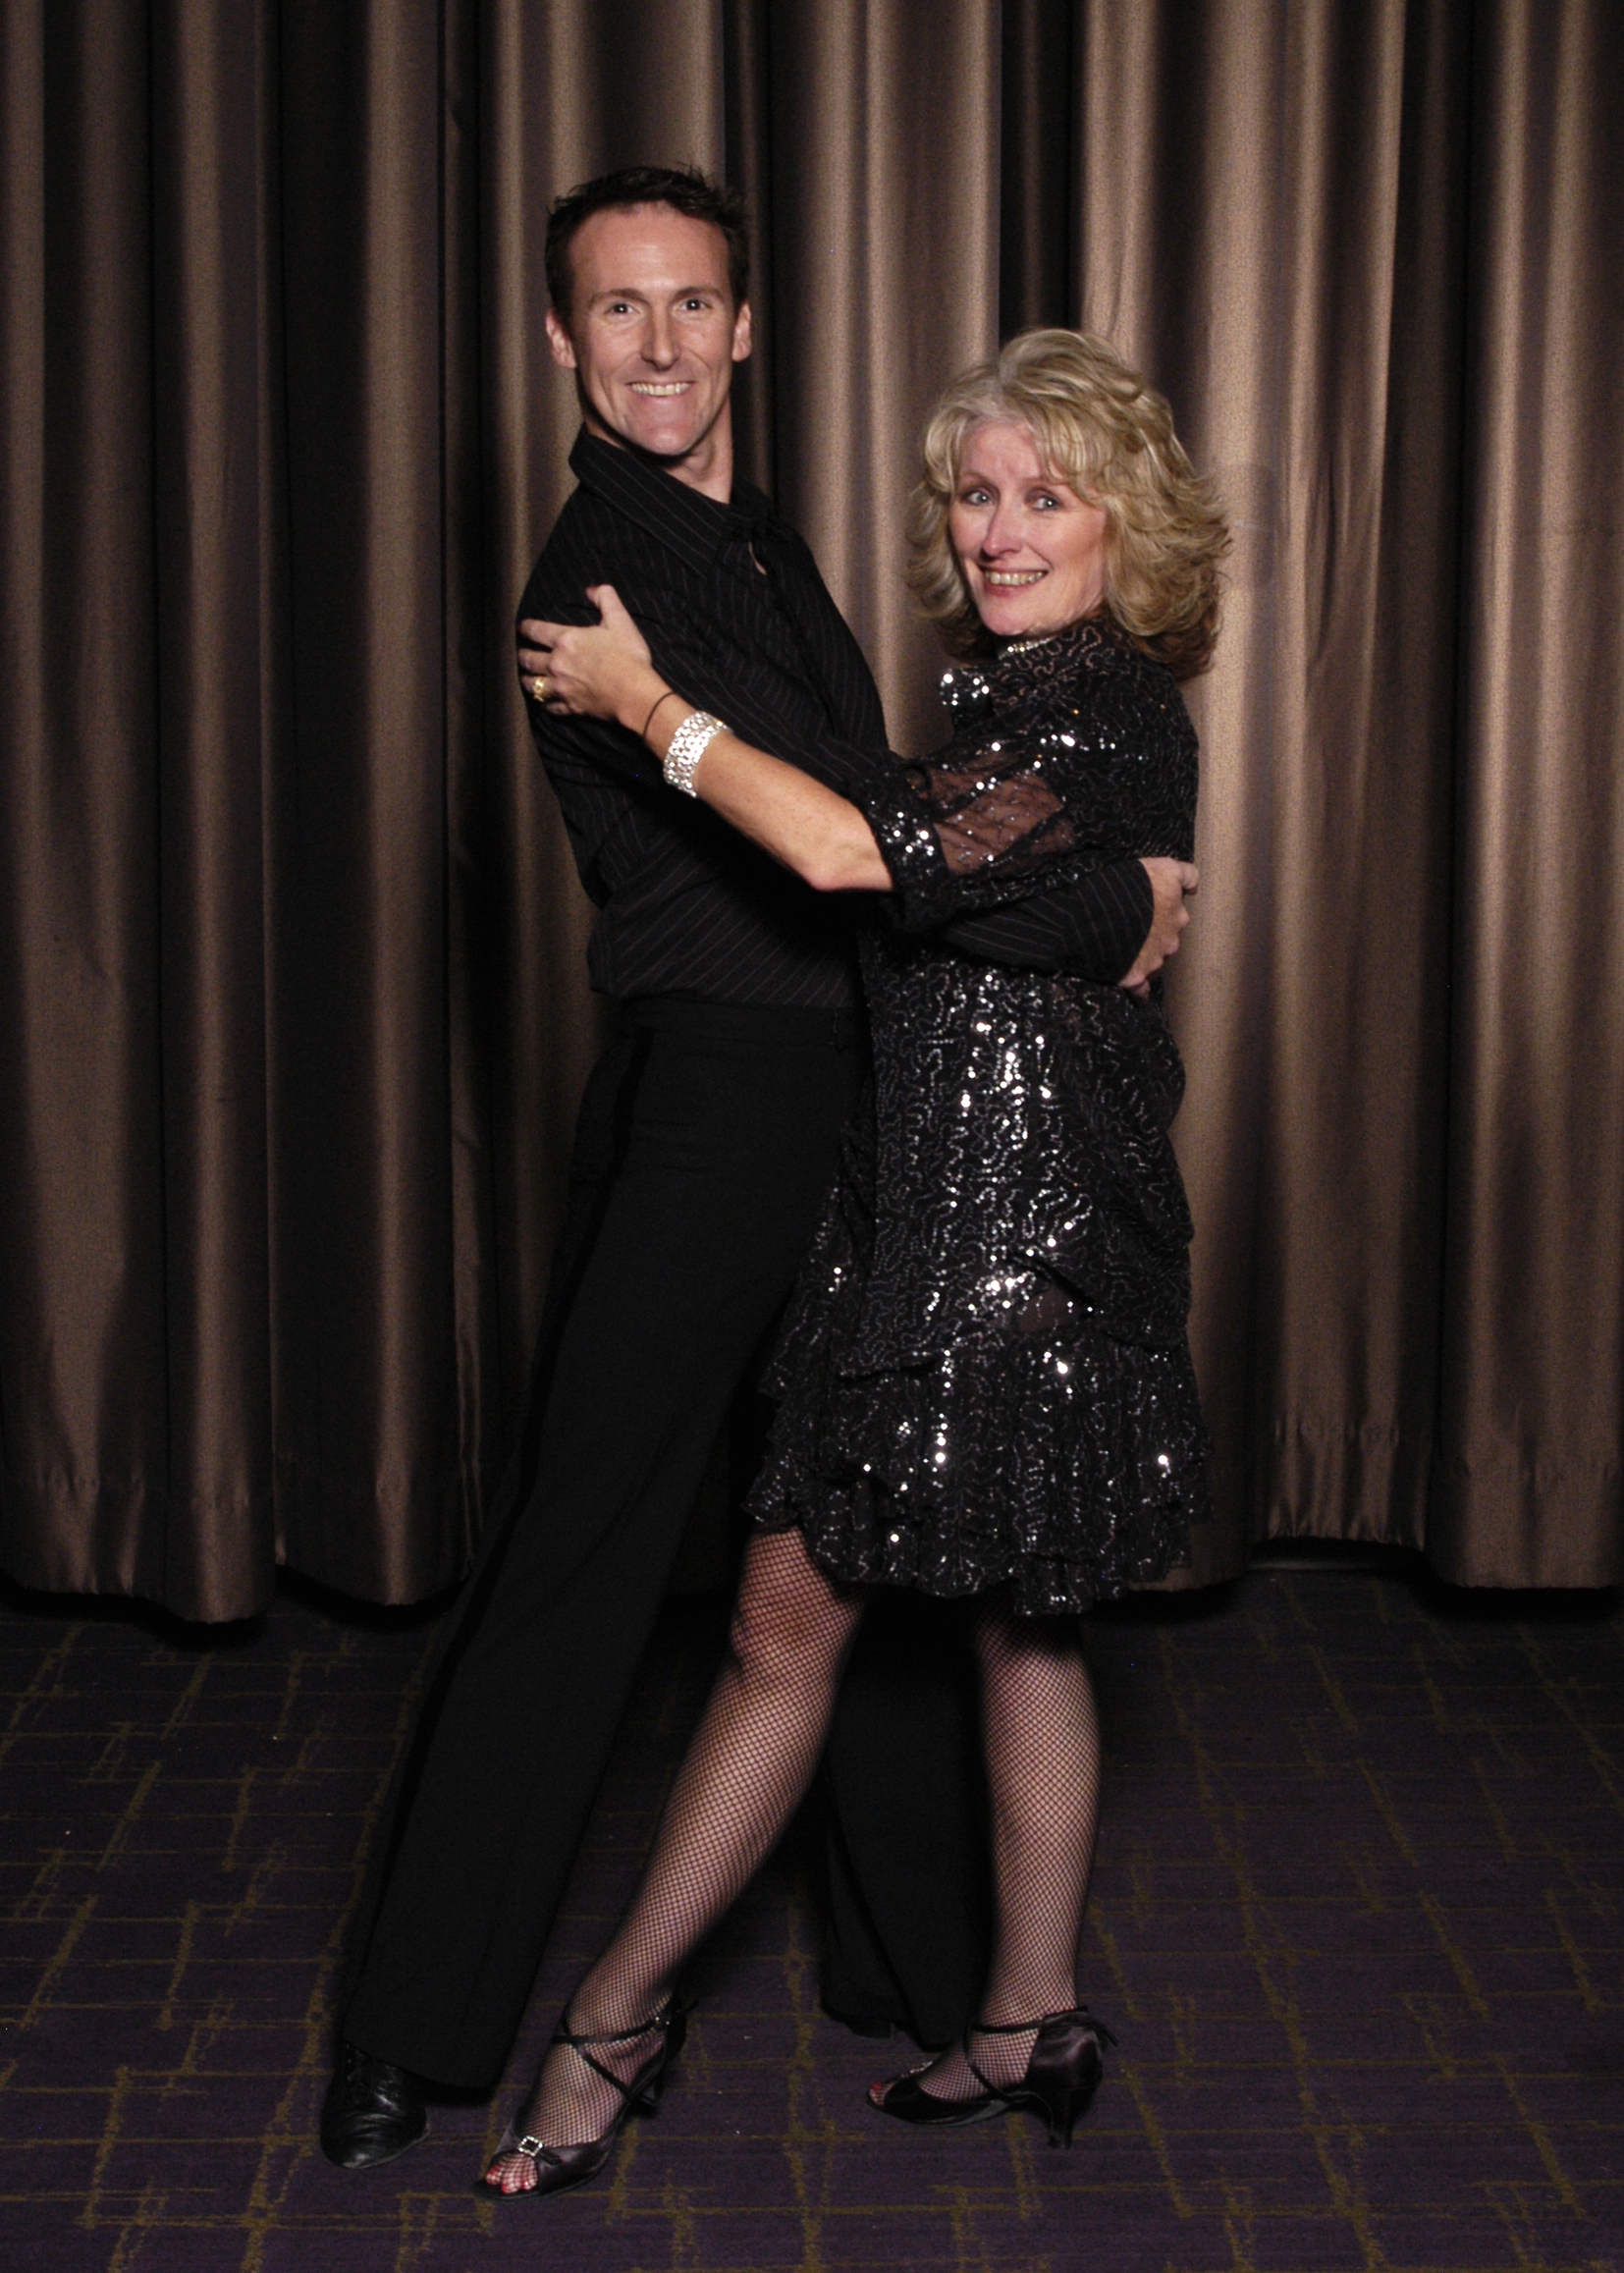 Dancing with the FW Stars Fundraiser